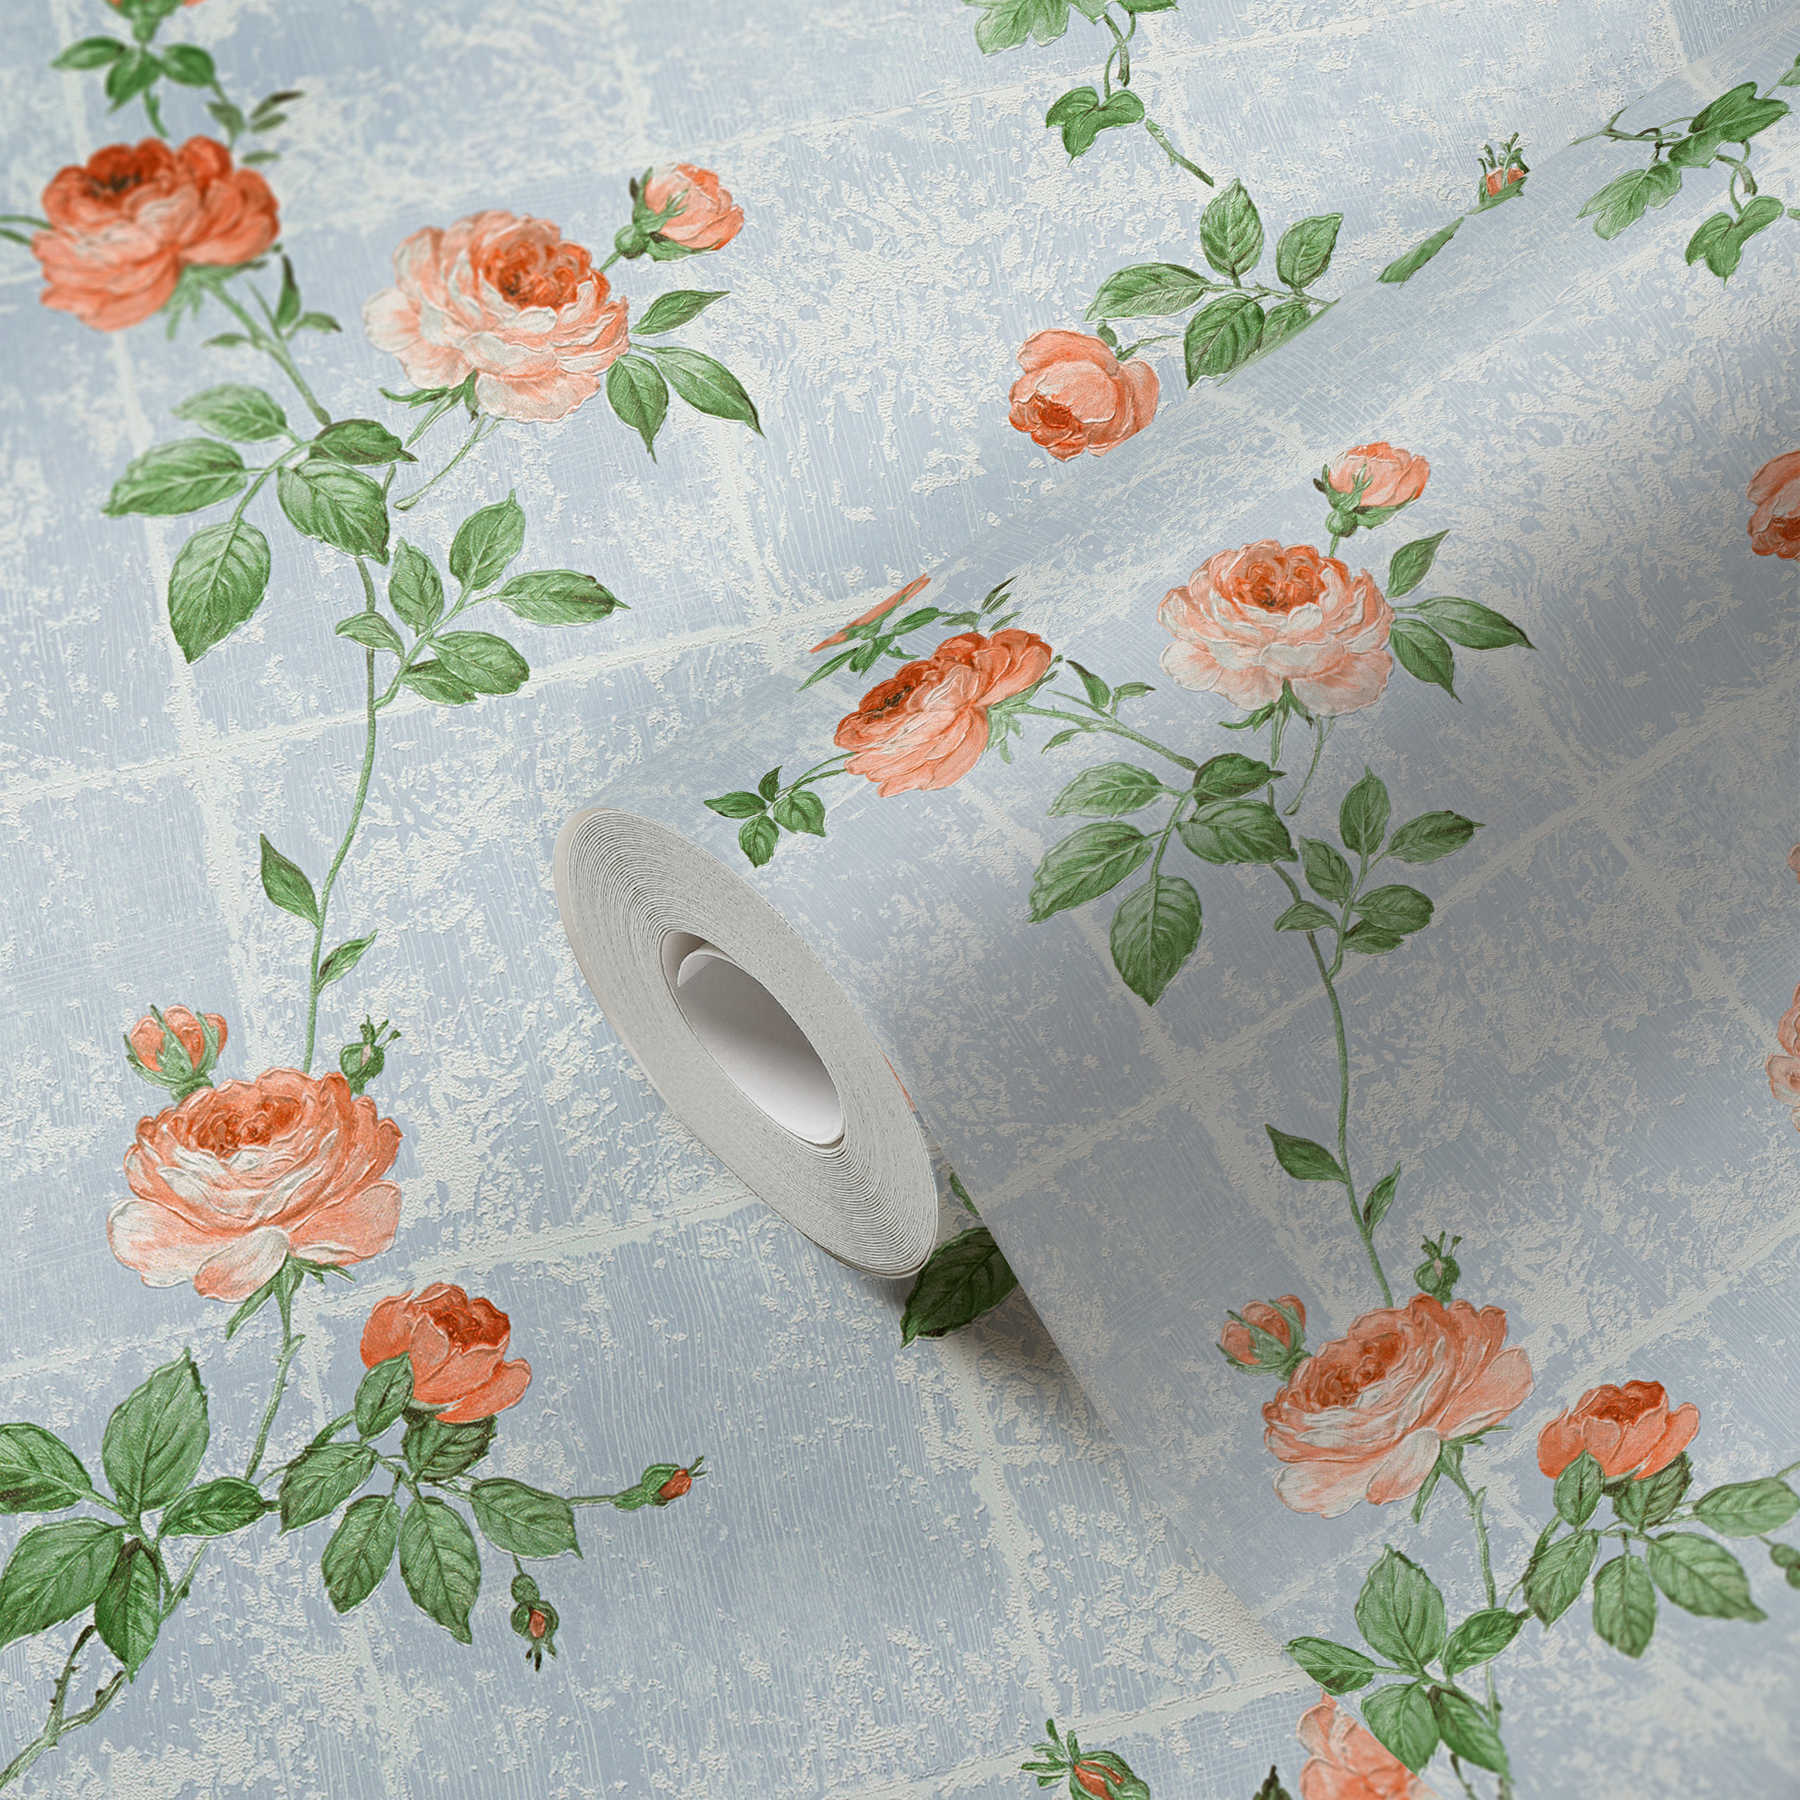             Tile look wallpaper in used loco with roses vines - blue
        